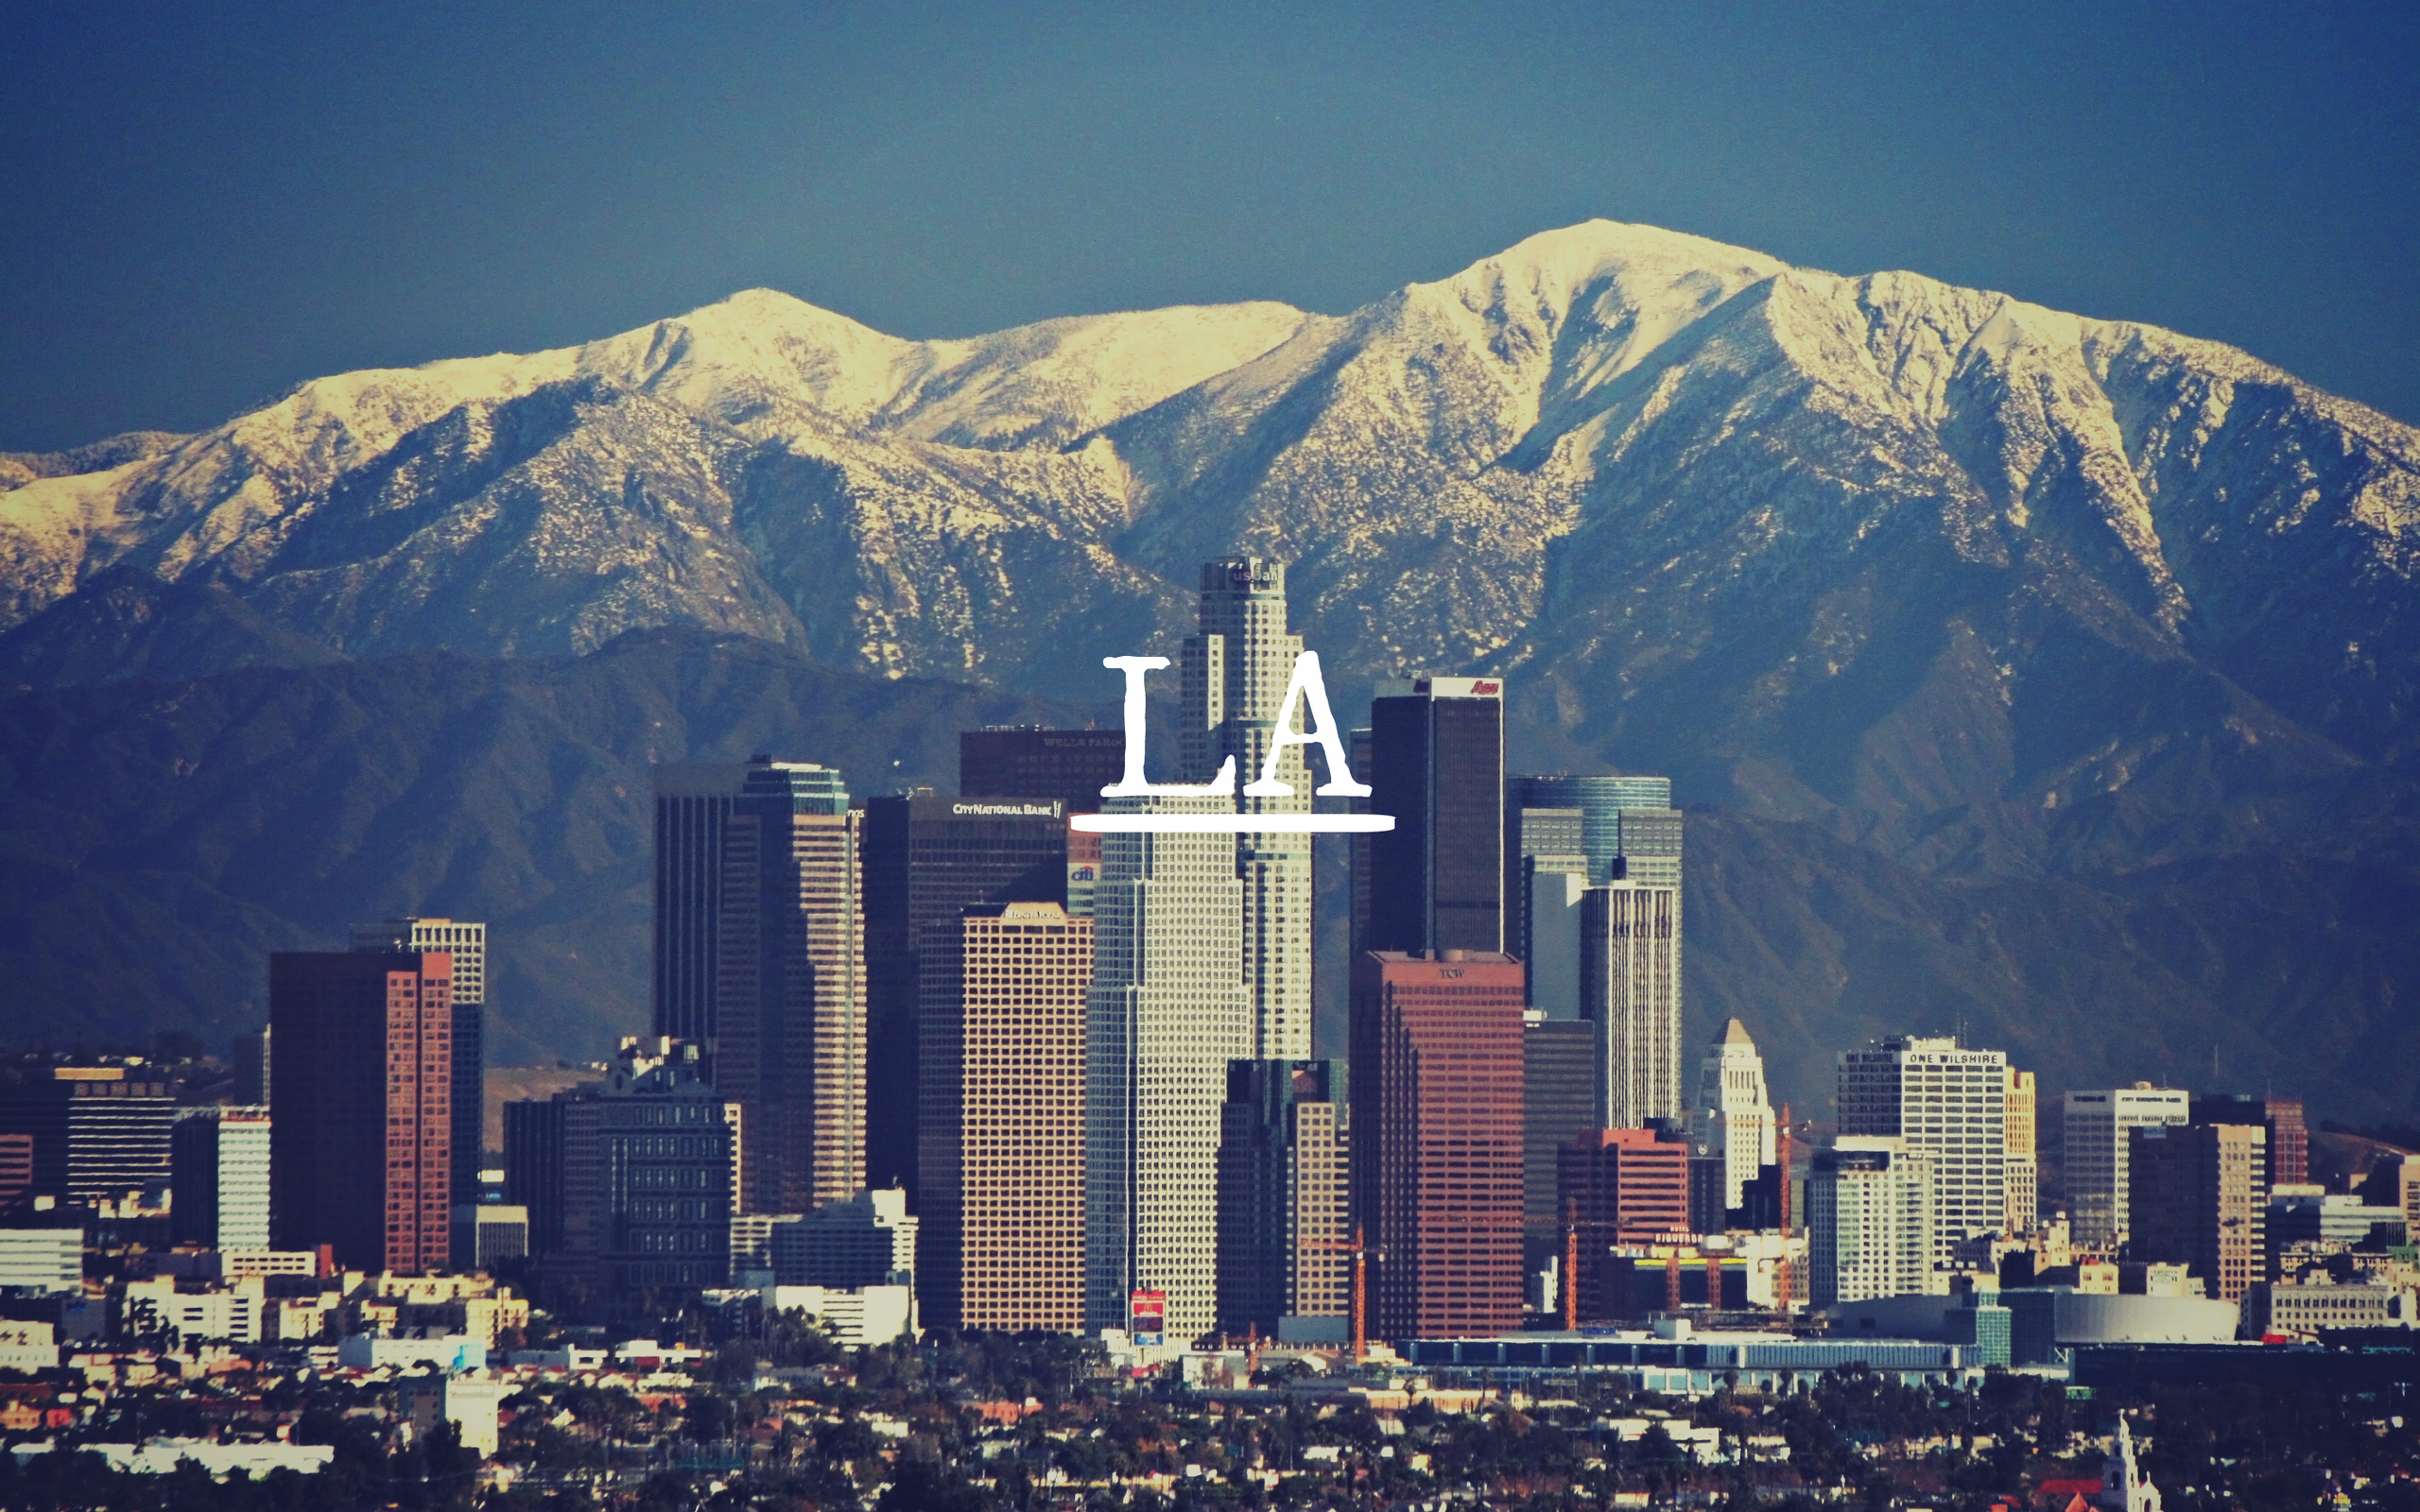 los angeles, man made, cities